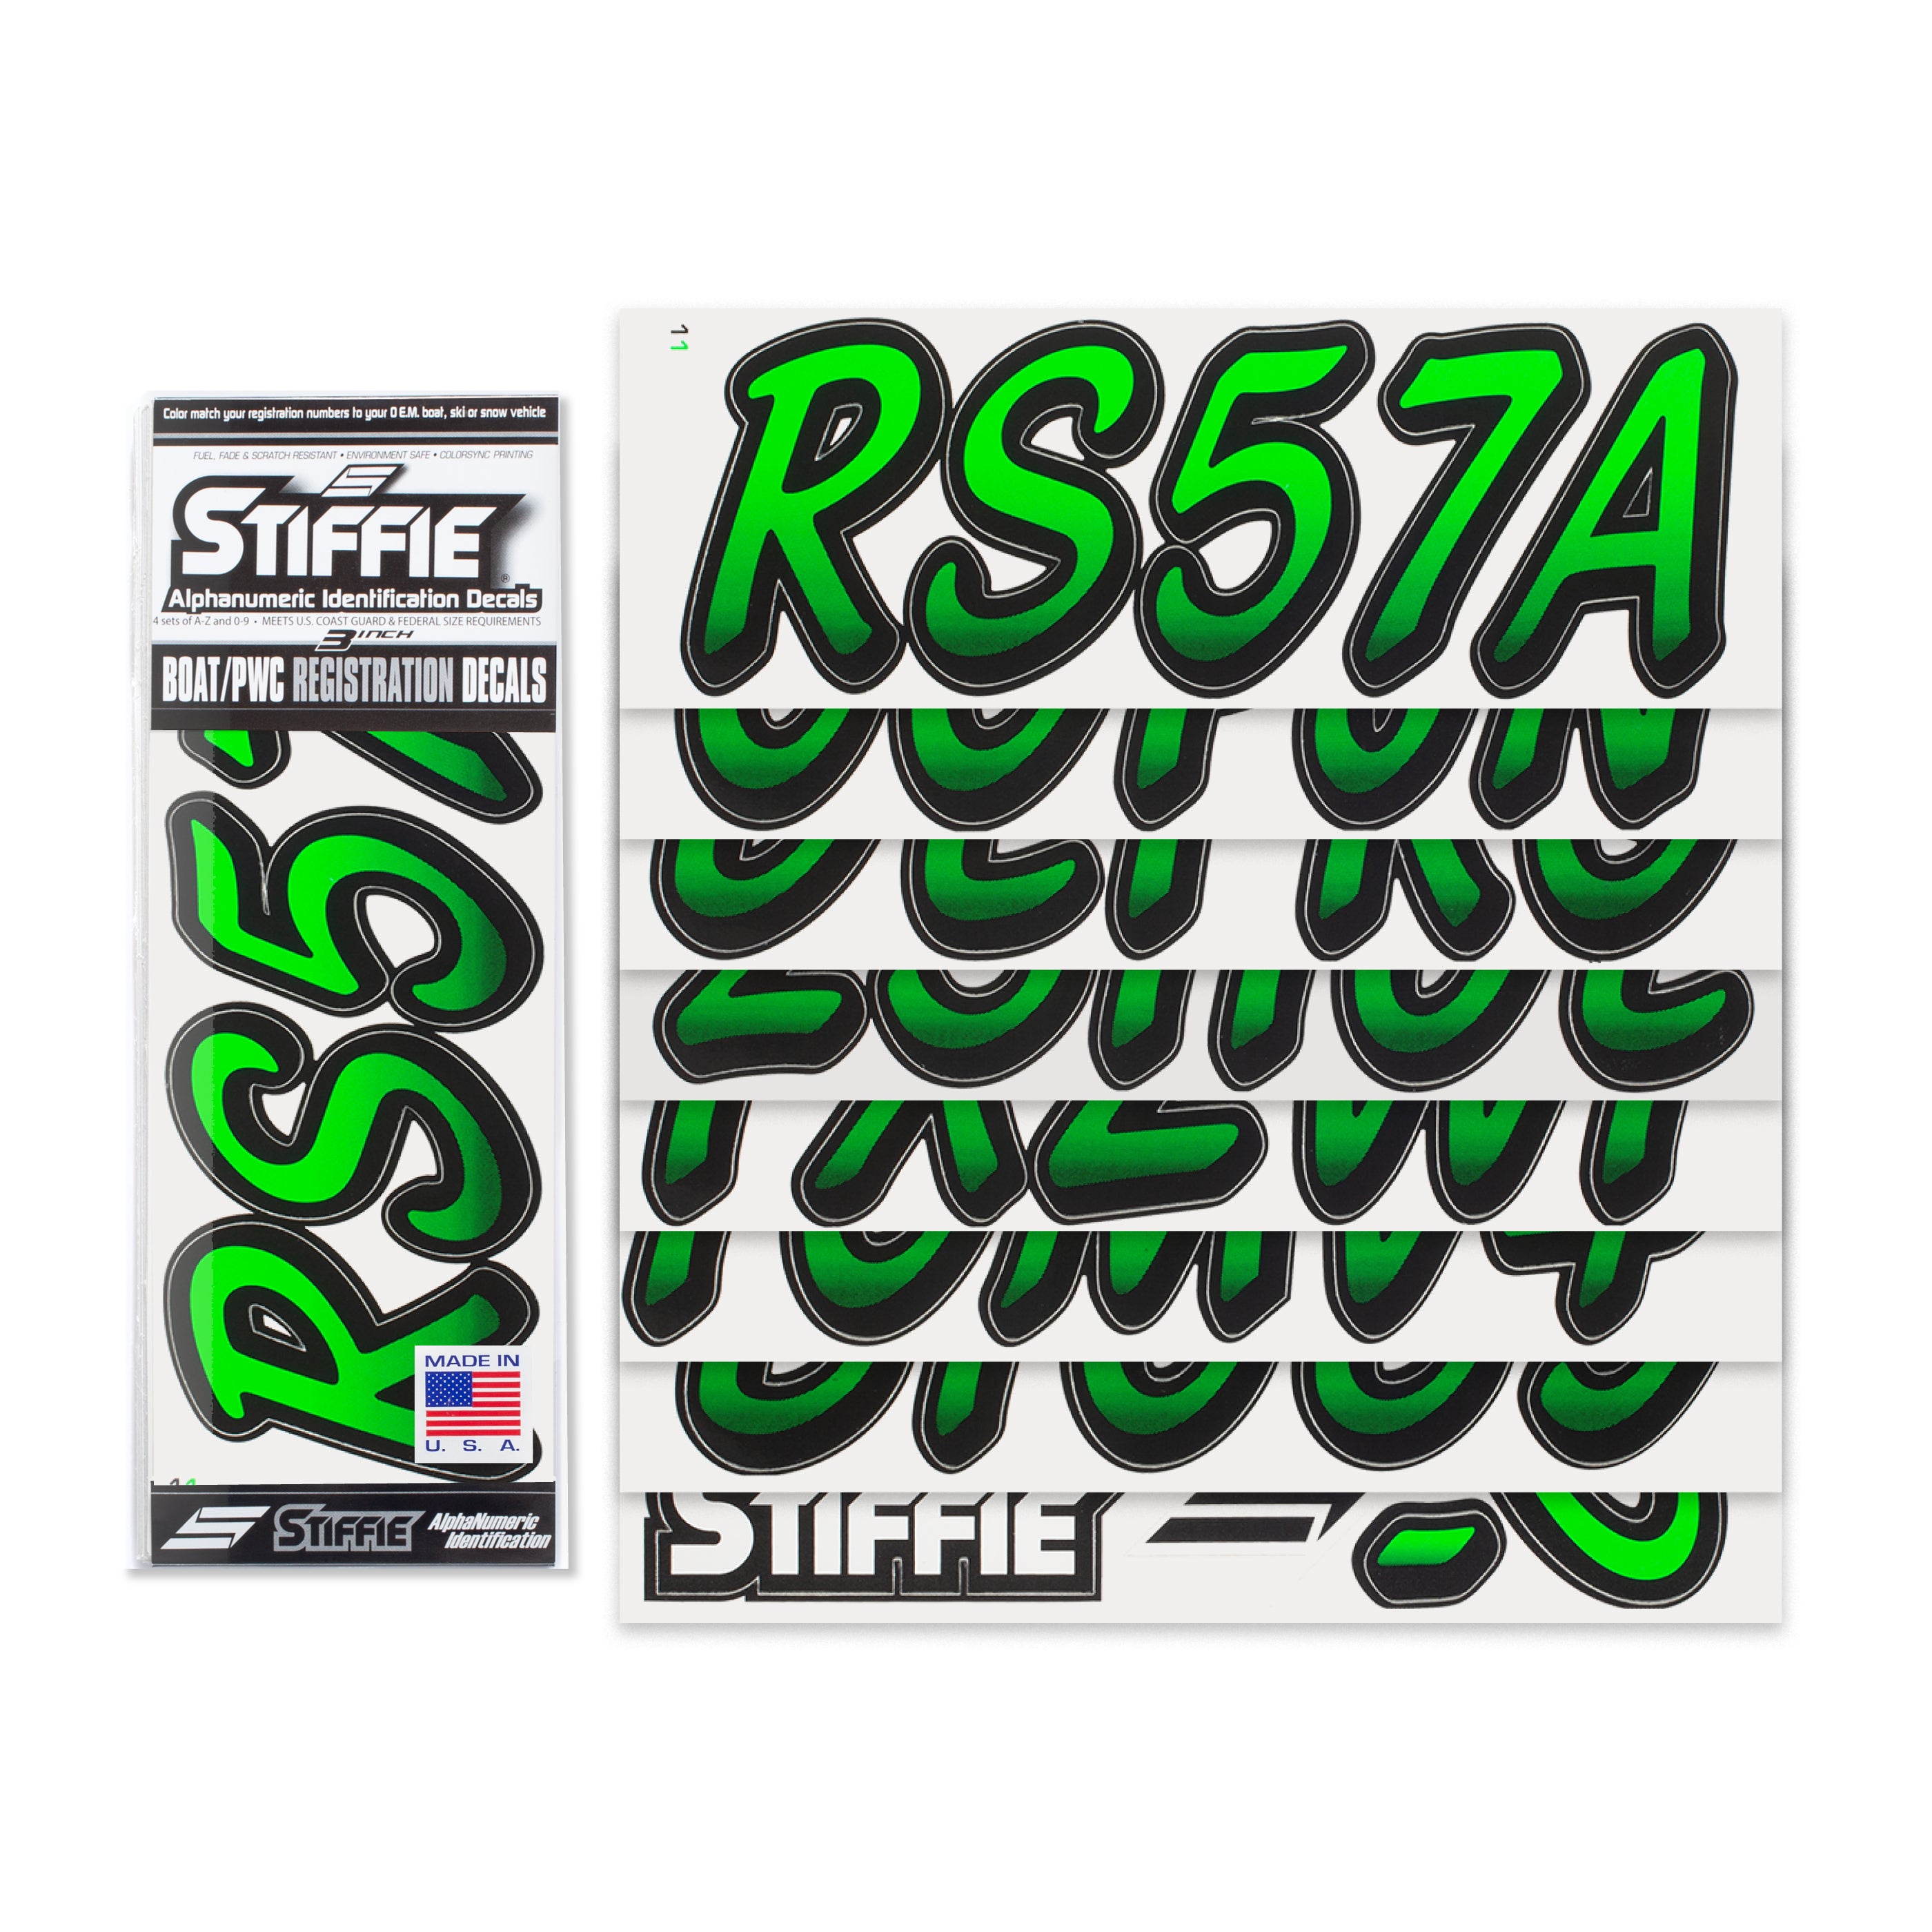 STIFFIE Whipline Electric Green/Black 3" Alpha-Numeric Registration Identification Numbers Stickers Decals for Boats & Personal Watercraft